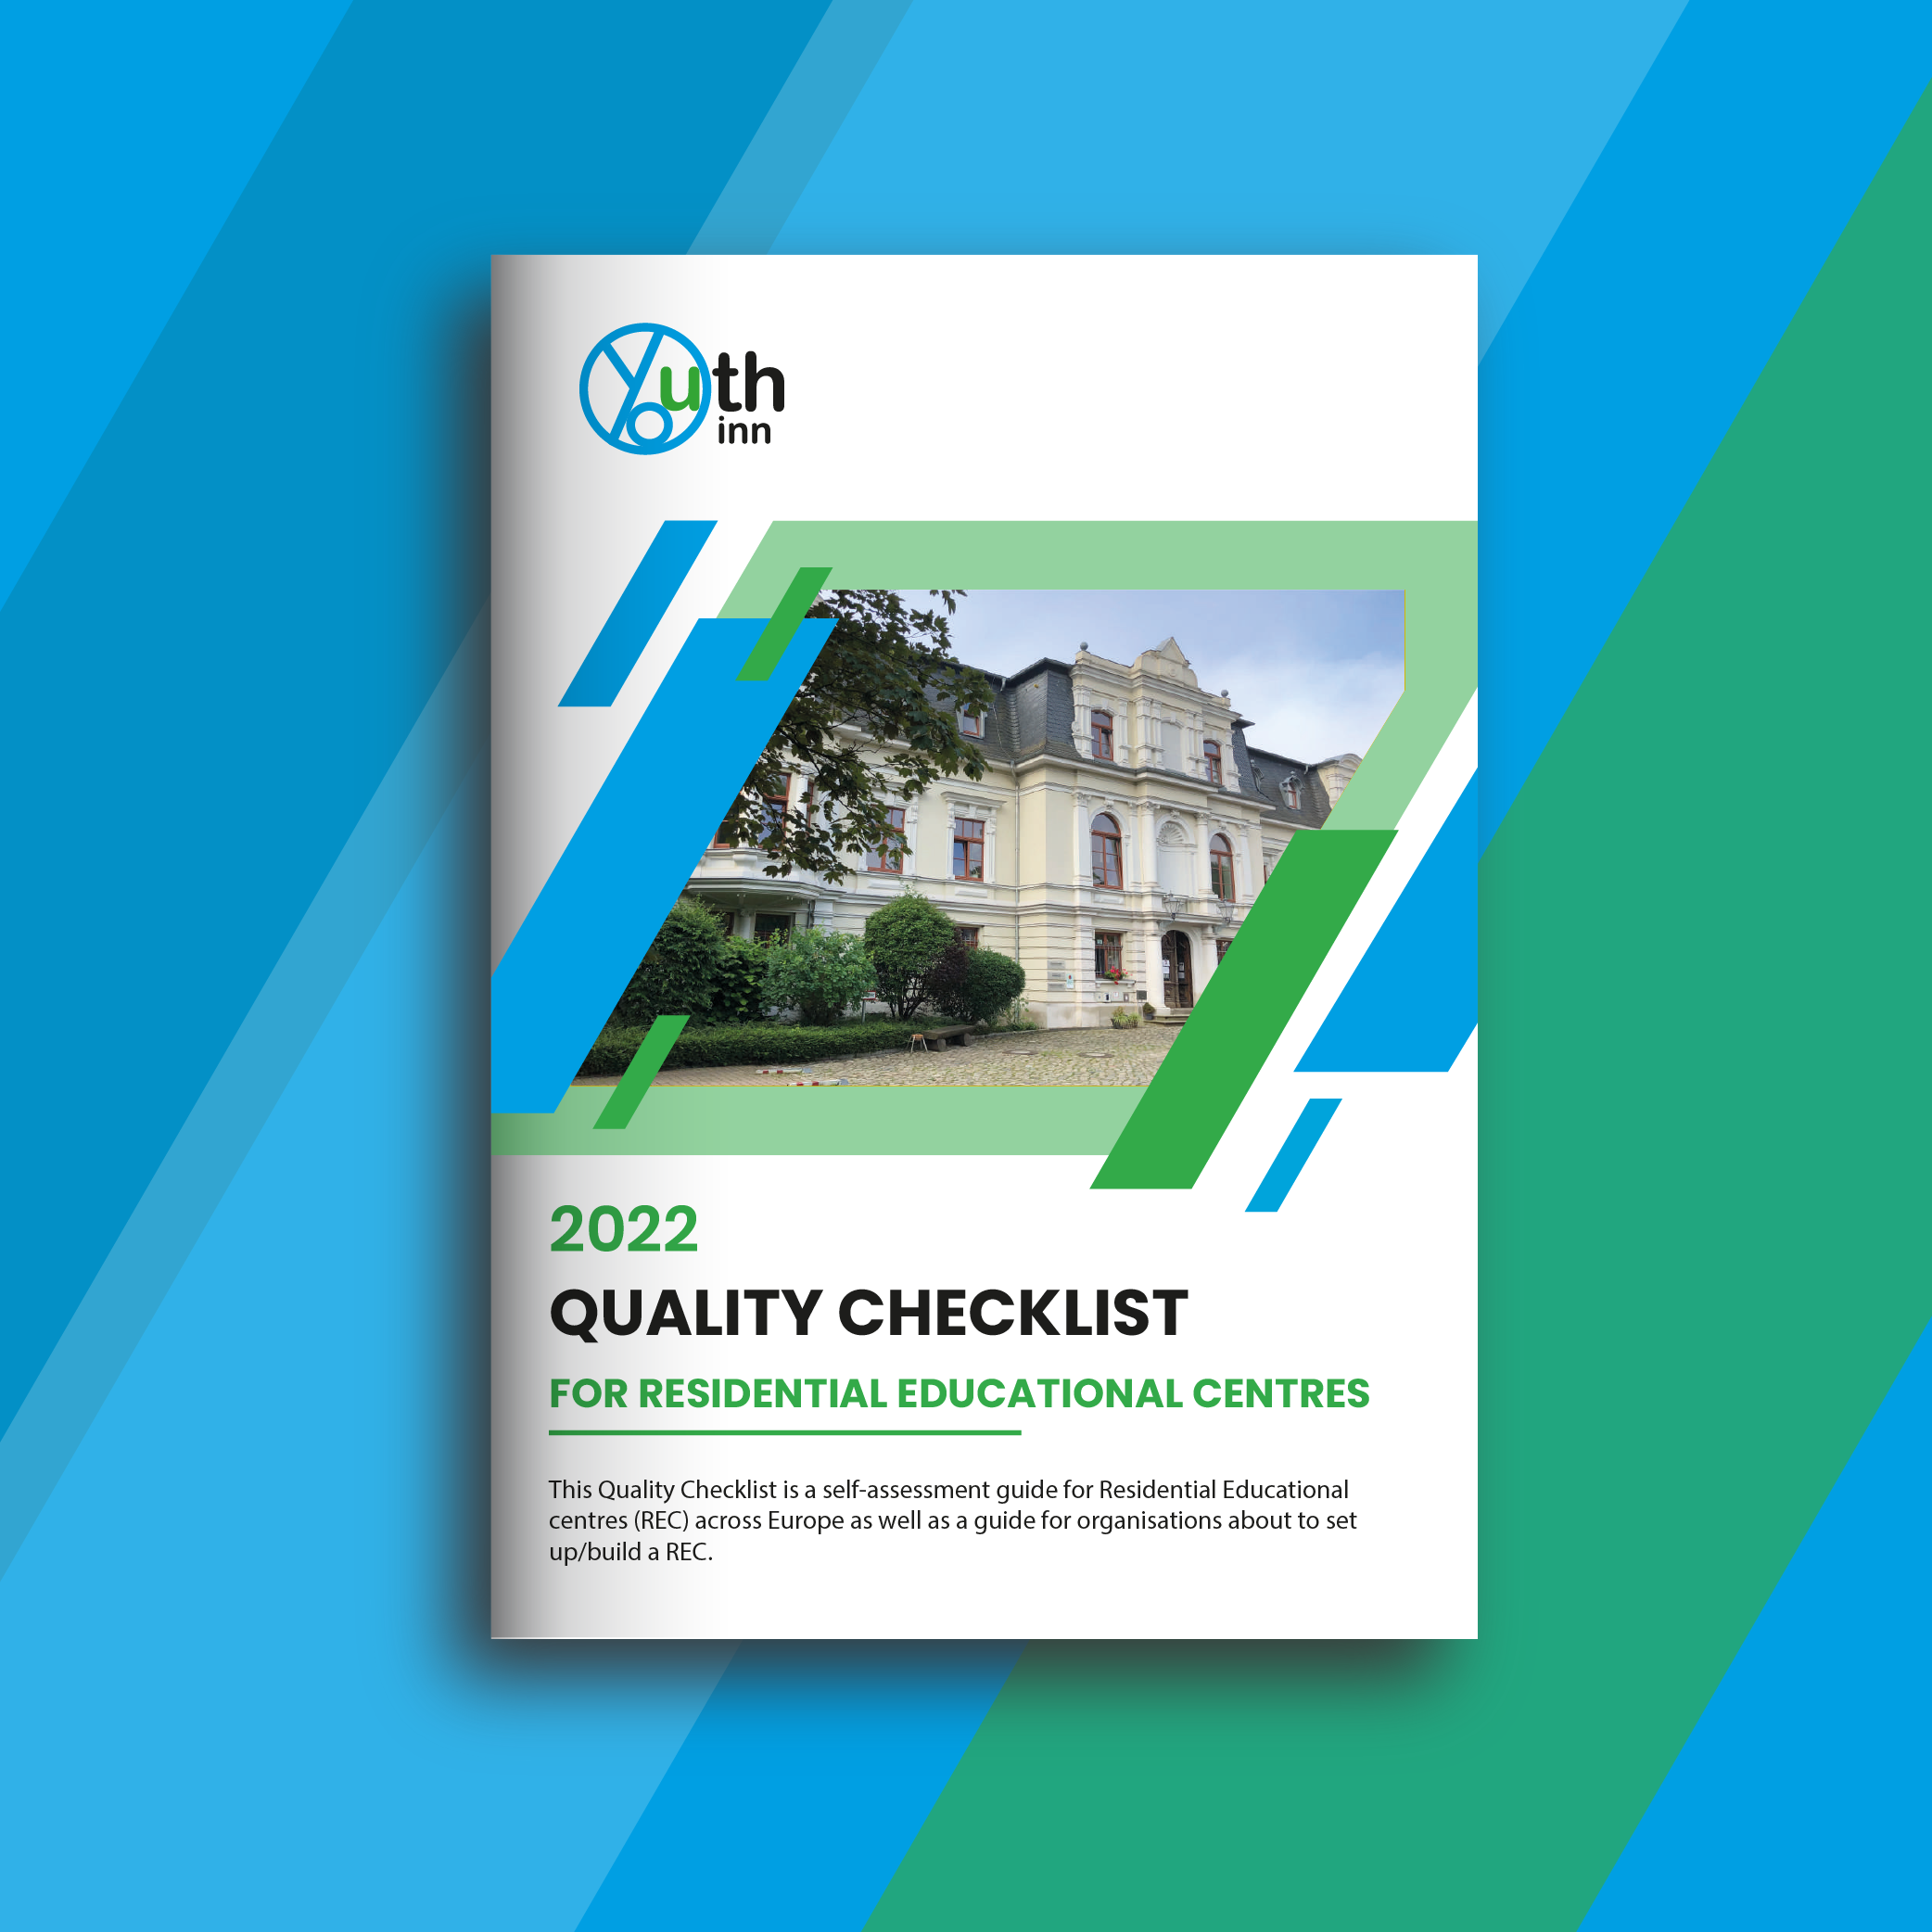 Youth INN – Quality checklist for residential educational centres 2022